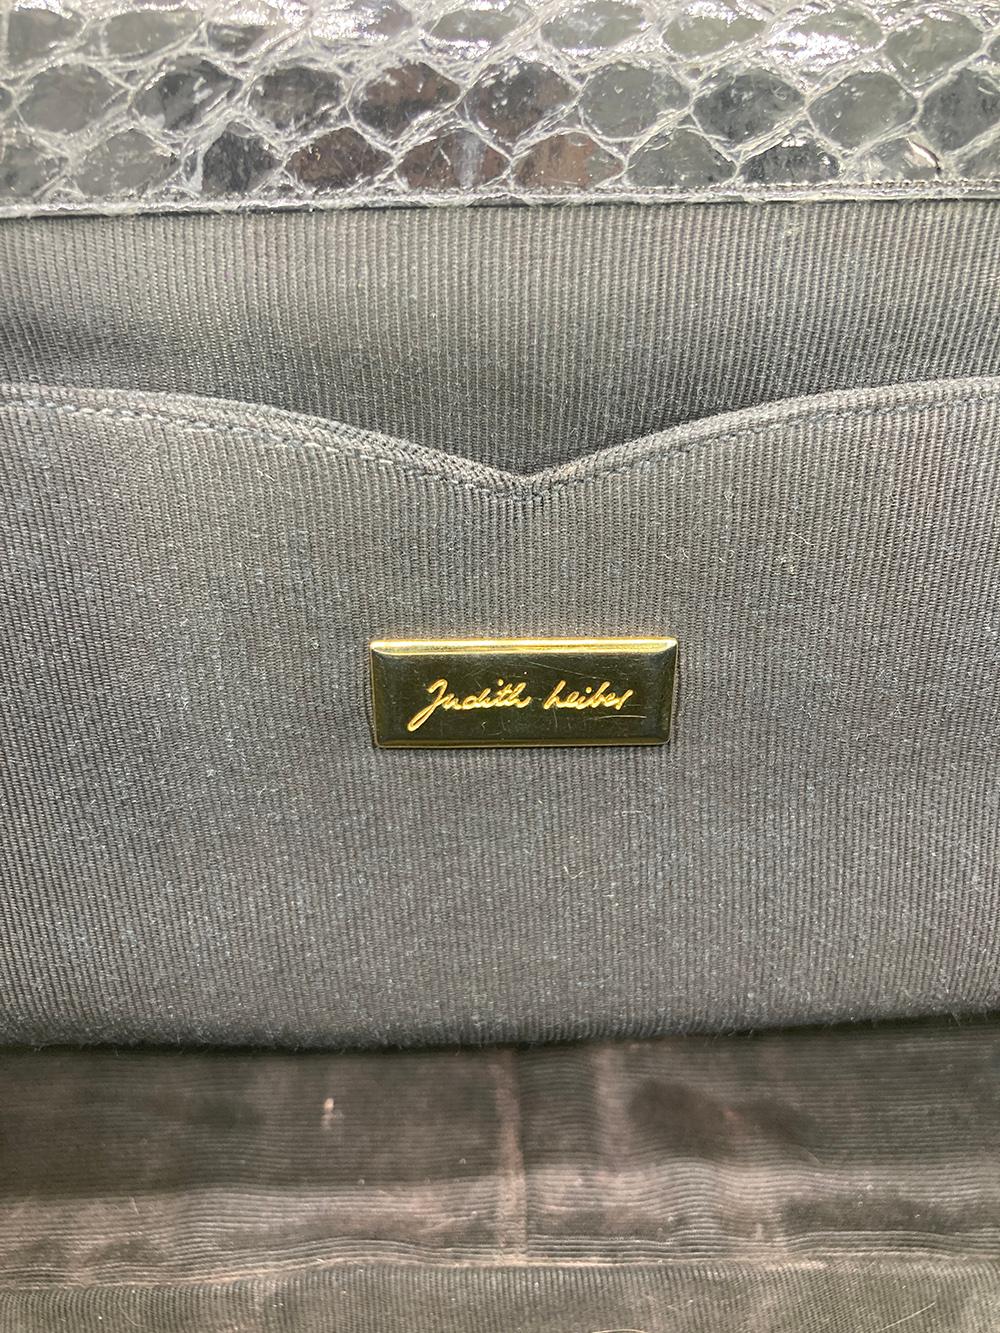 Judith Leiber Black Pleated Leather Resin Bone Top Clutch For Sale 3